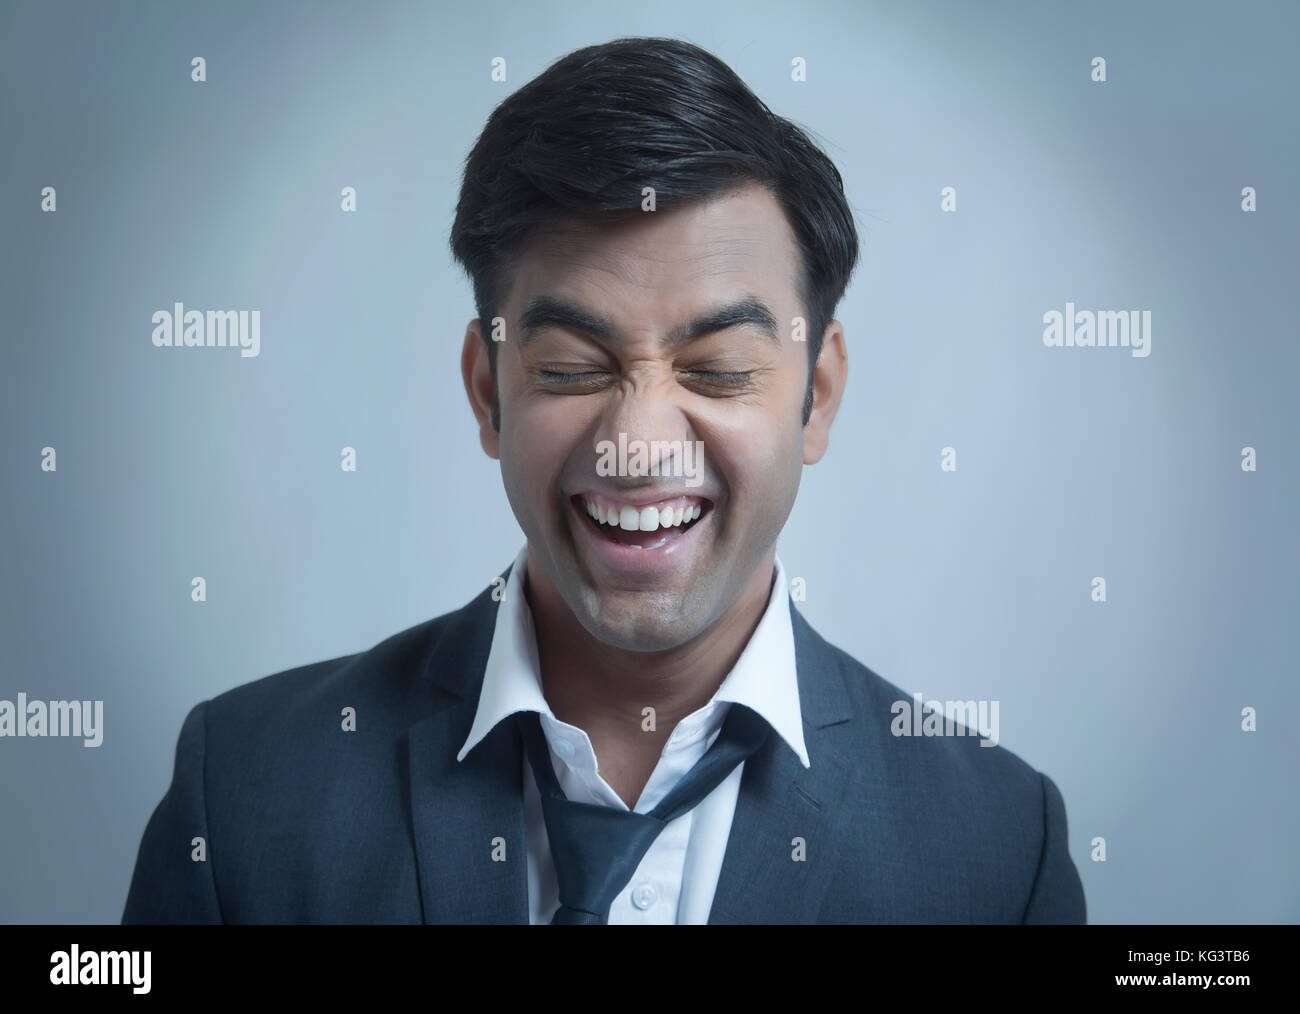 Young businessman making face Banque D'Images